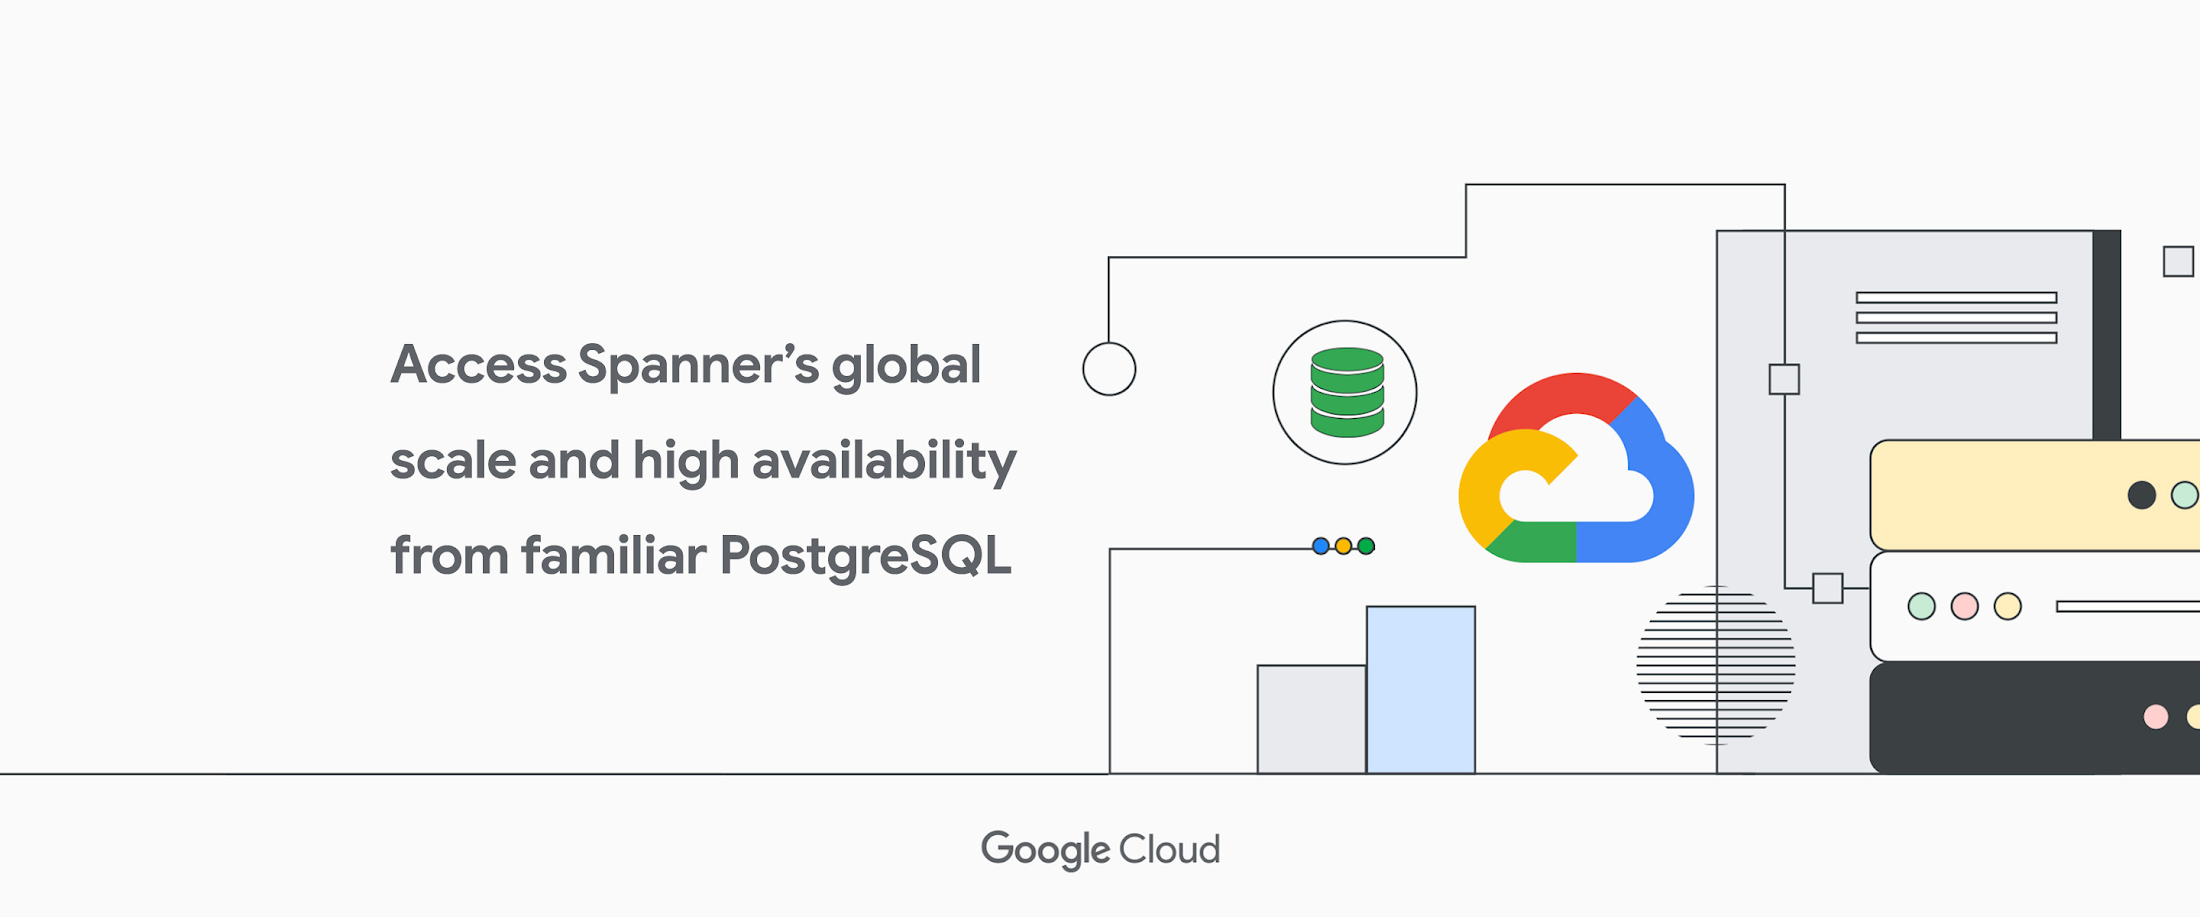 Cloud Spanner is our fully managed relational database that provides the highest levels of consistency and availability at any scale. It‘s trusted b